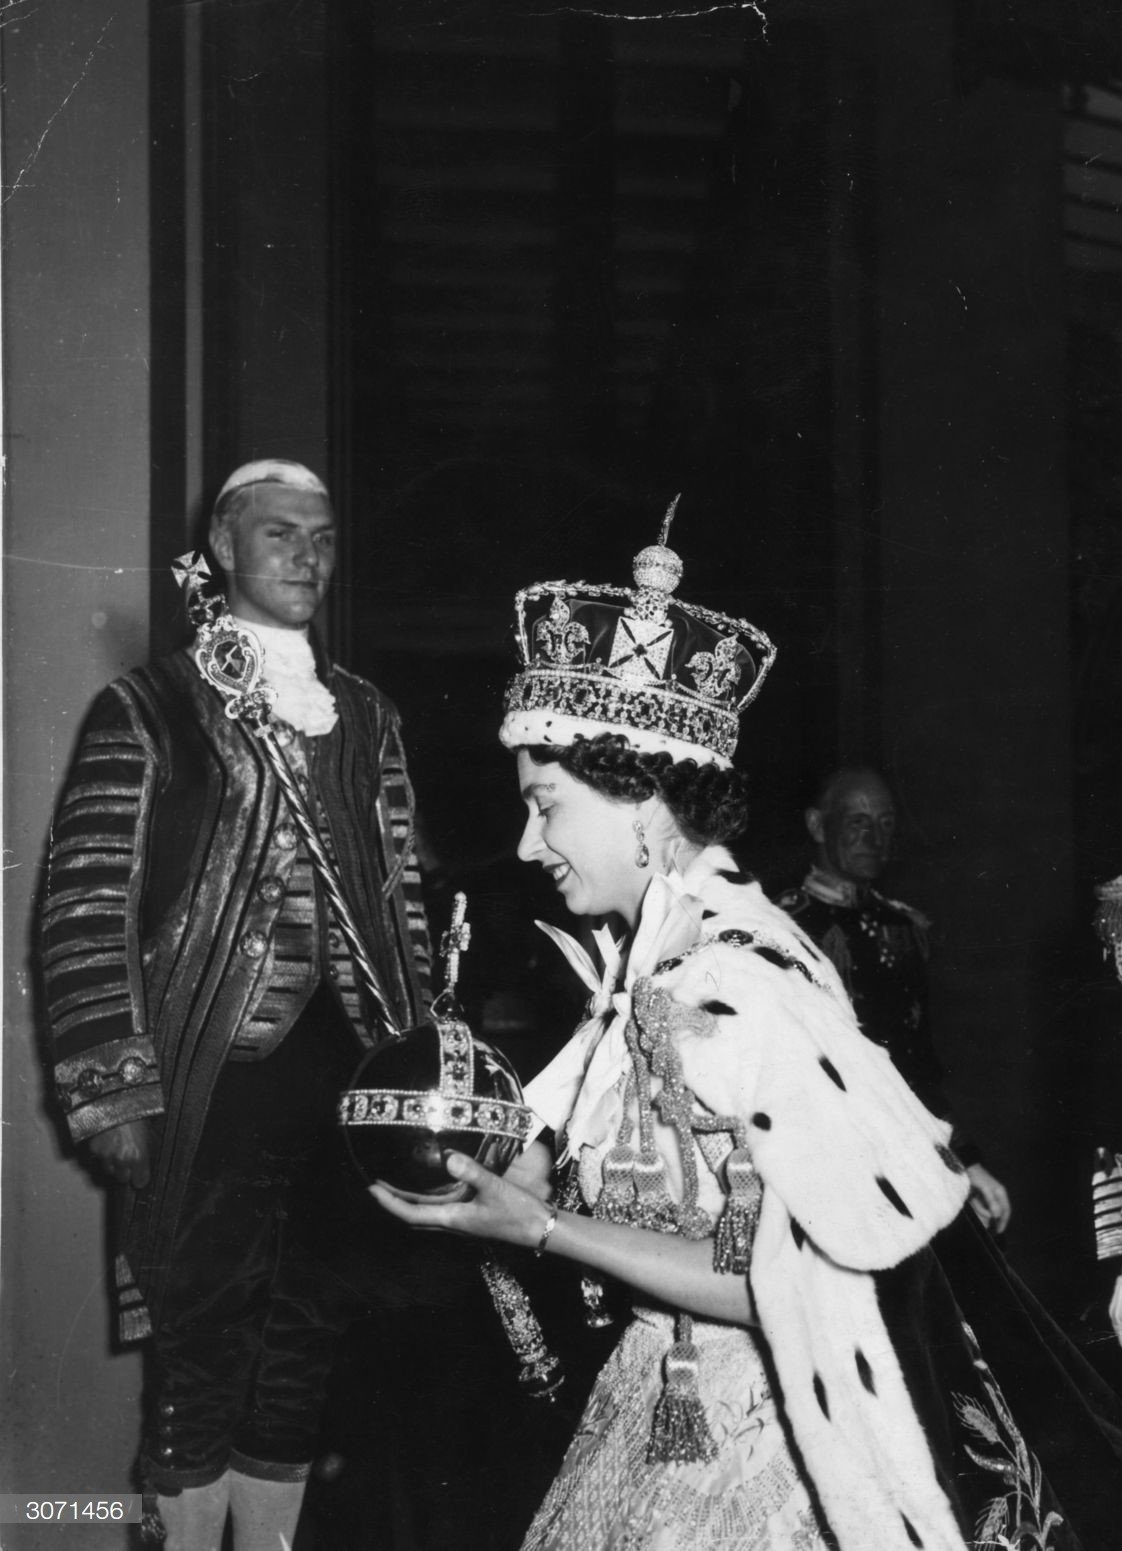 Queen Elizabeth II, wearing the Imperial State crown and carrying the Orb and Sceptre, returns to Buckingham Palace following her Coronation on 2nd June 1953. | Source: Getty Images